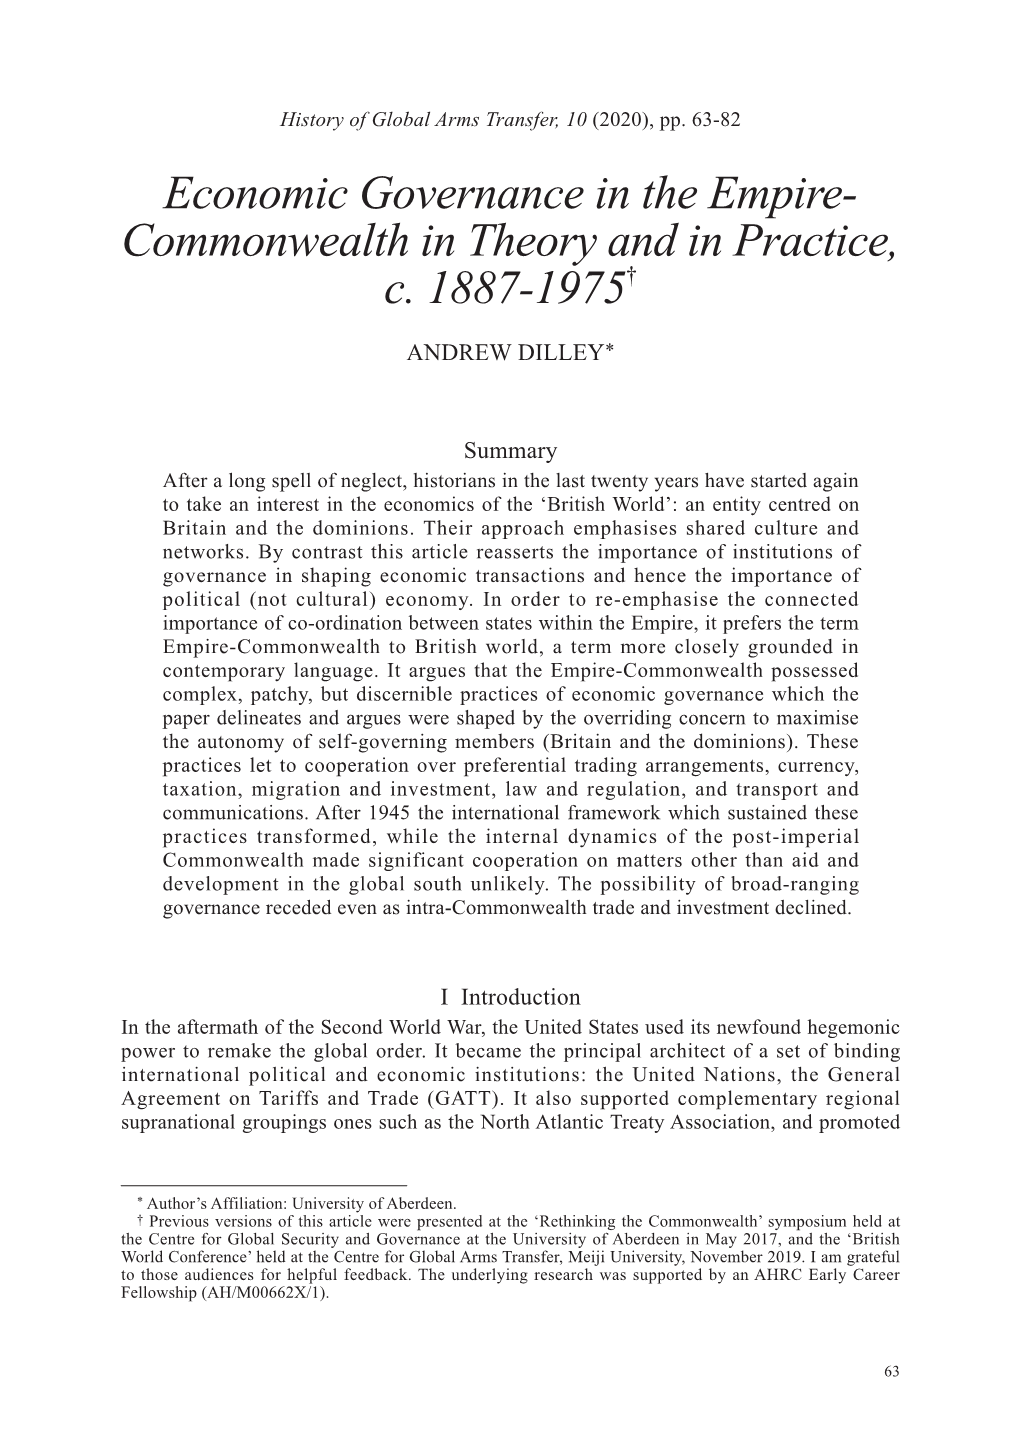 Economic Governance in the Empire- Commonwealth in Theory and in Practice, C